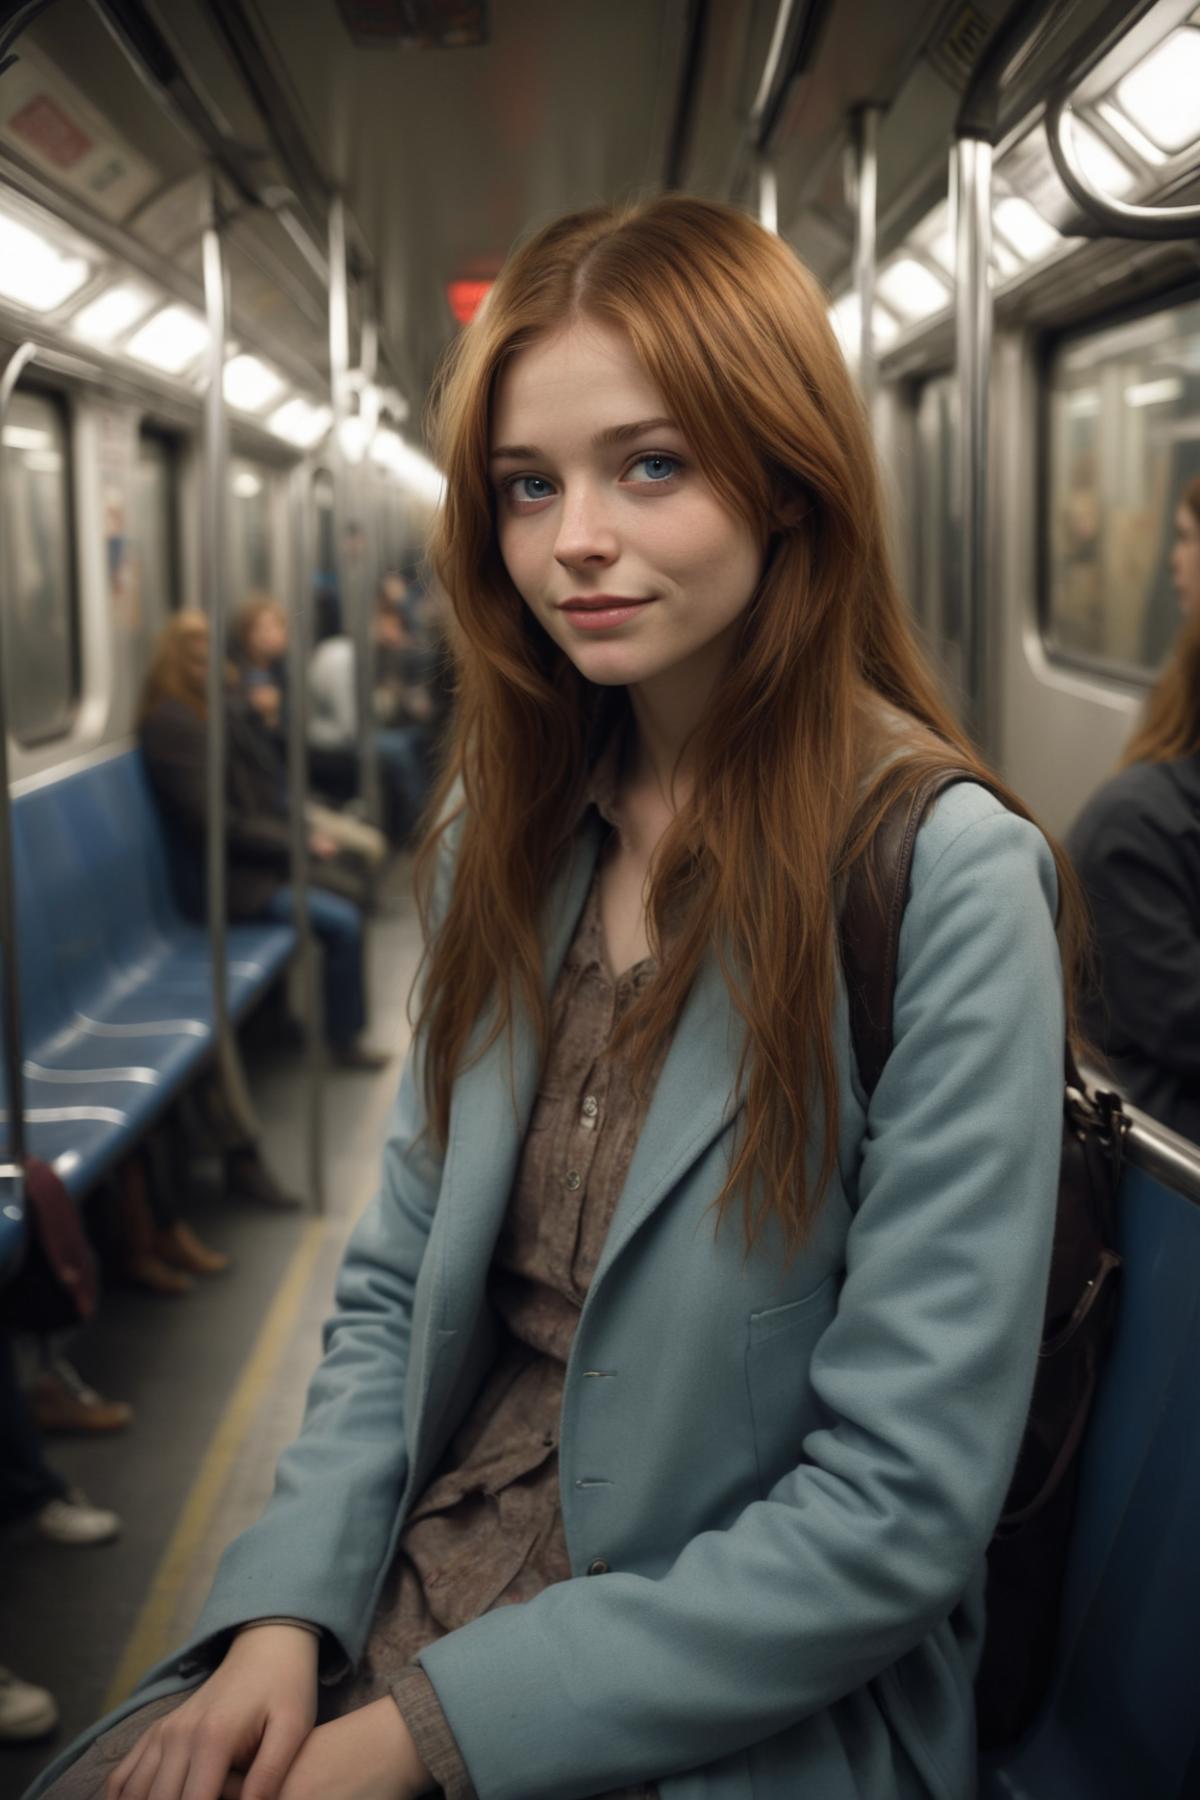 A woman in a blue jacket and brown purse sitting on a subway train.